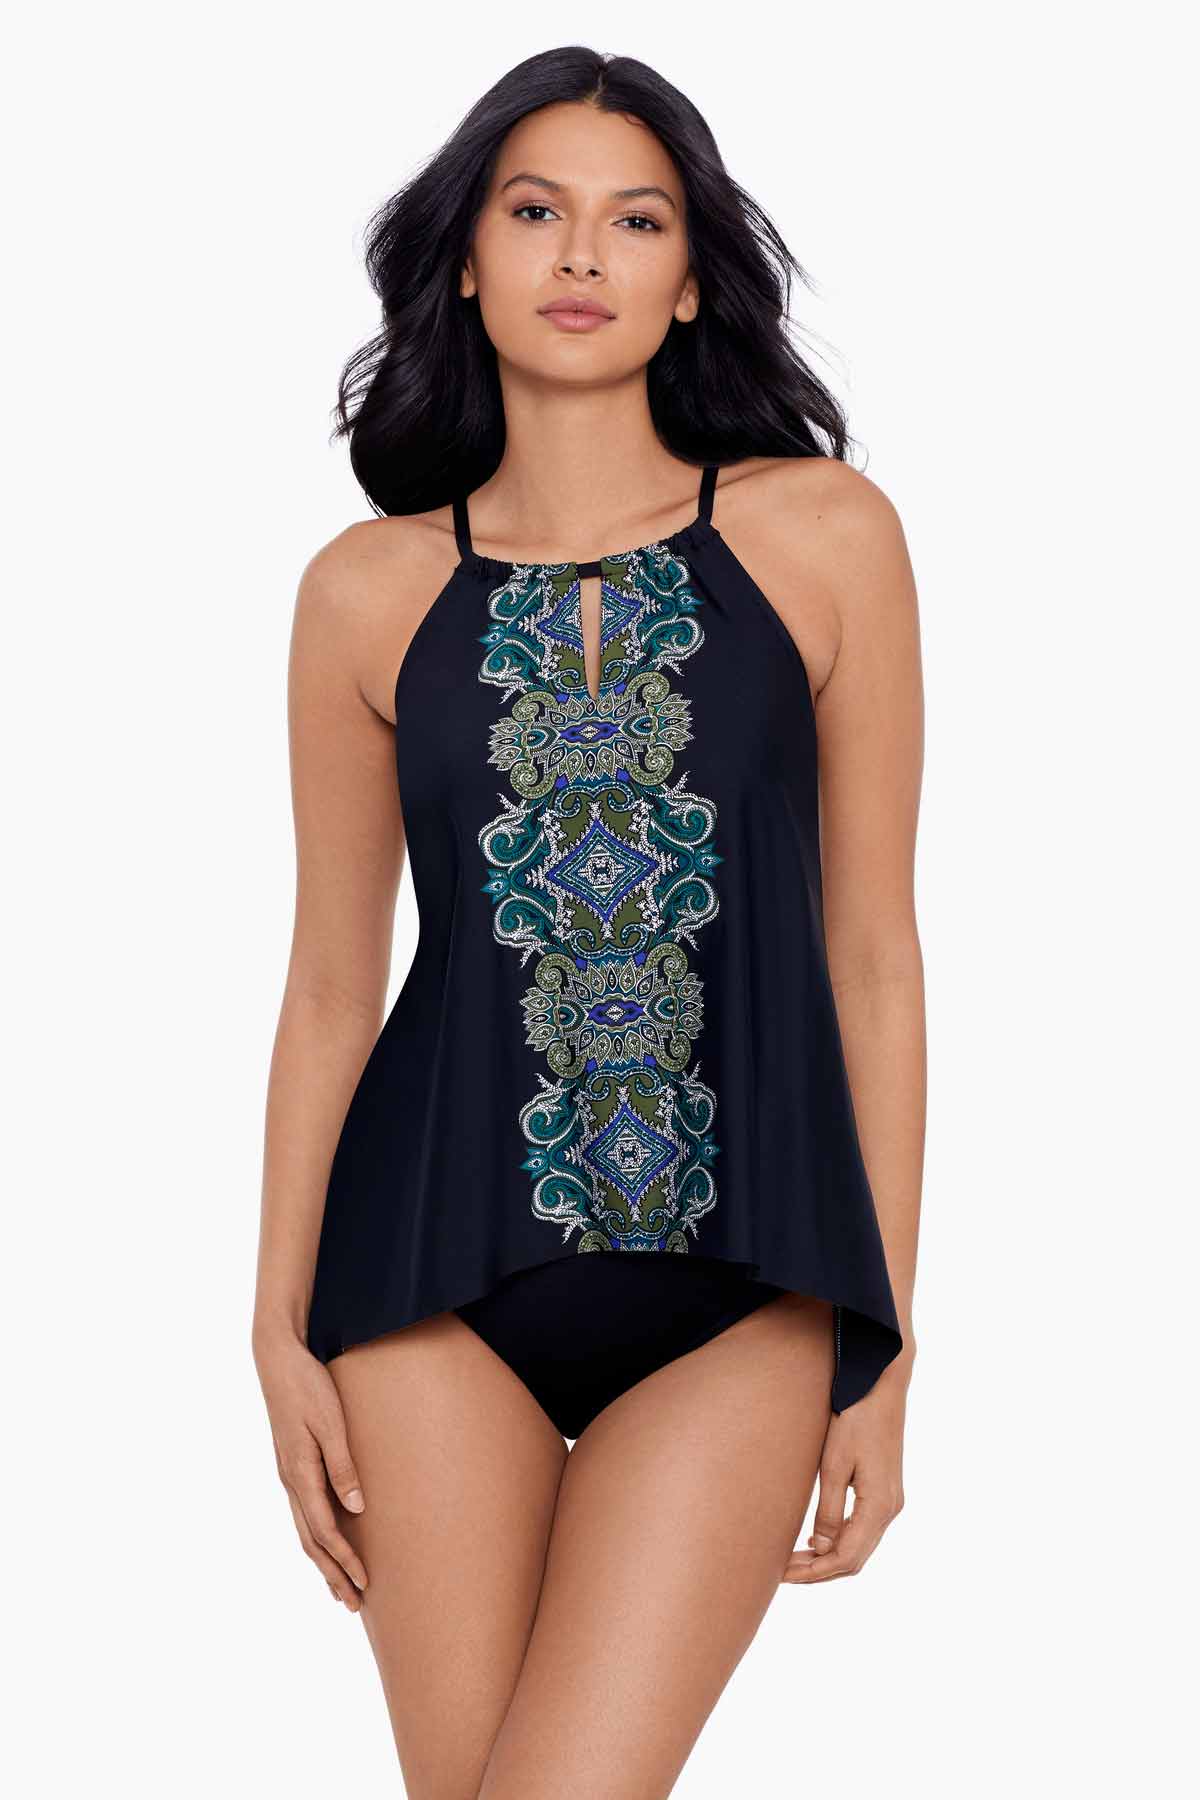 Bust Support – Miraclesuit